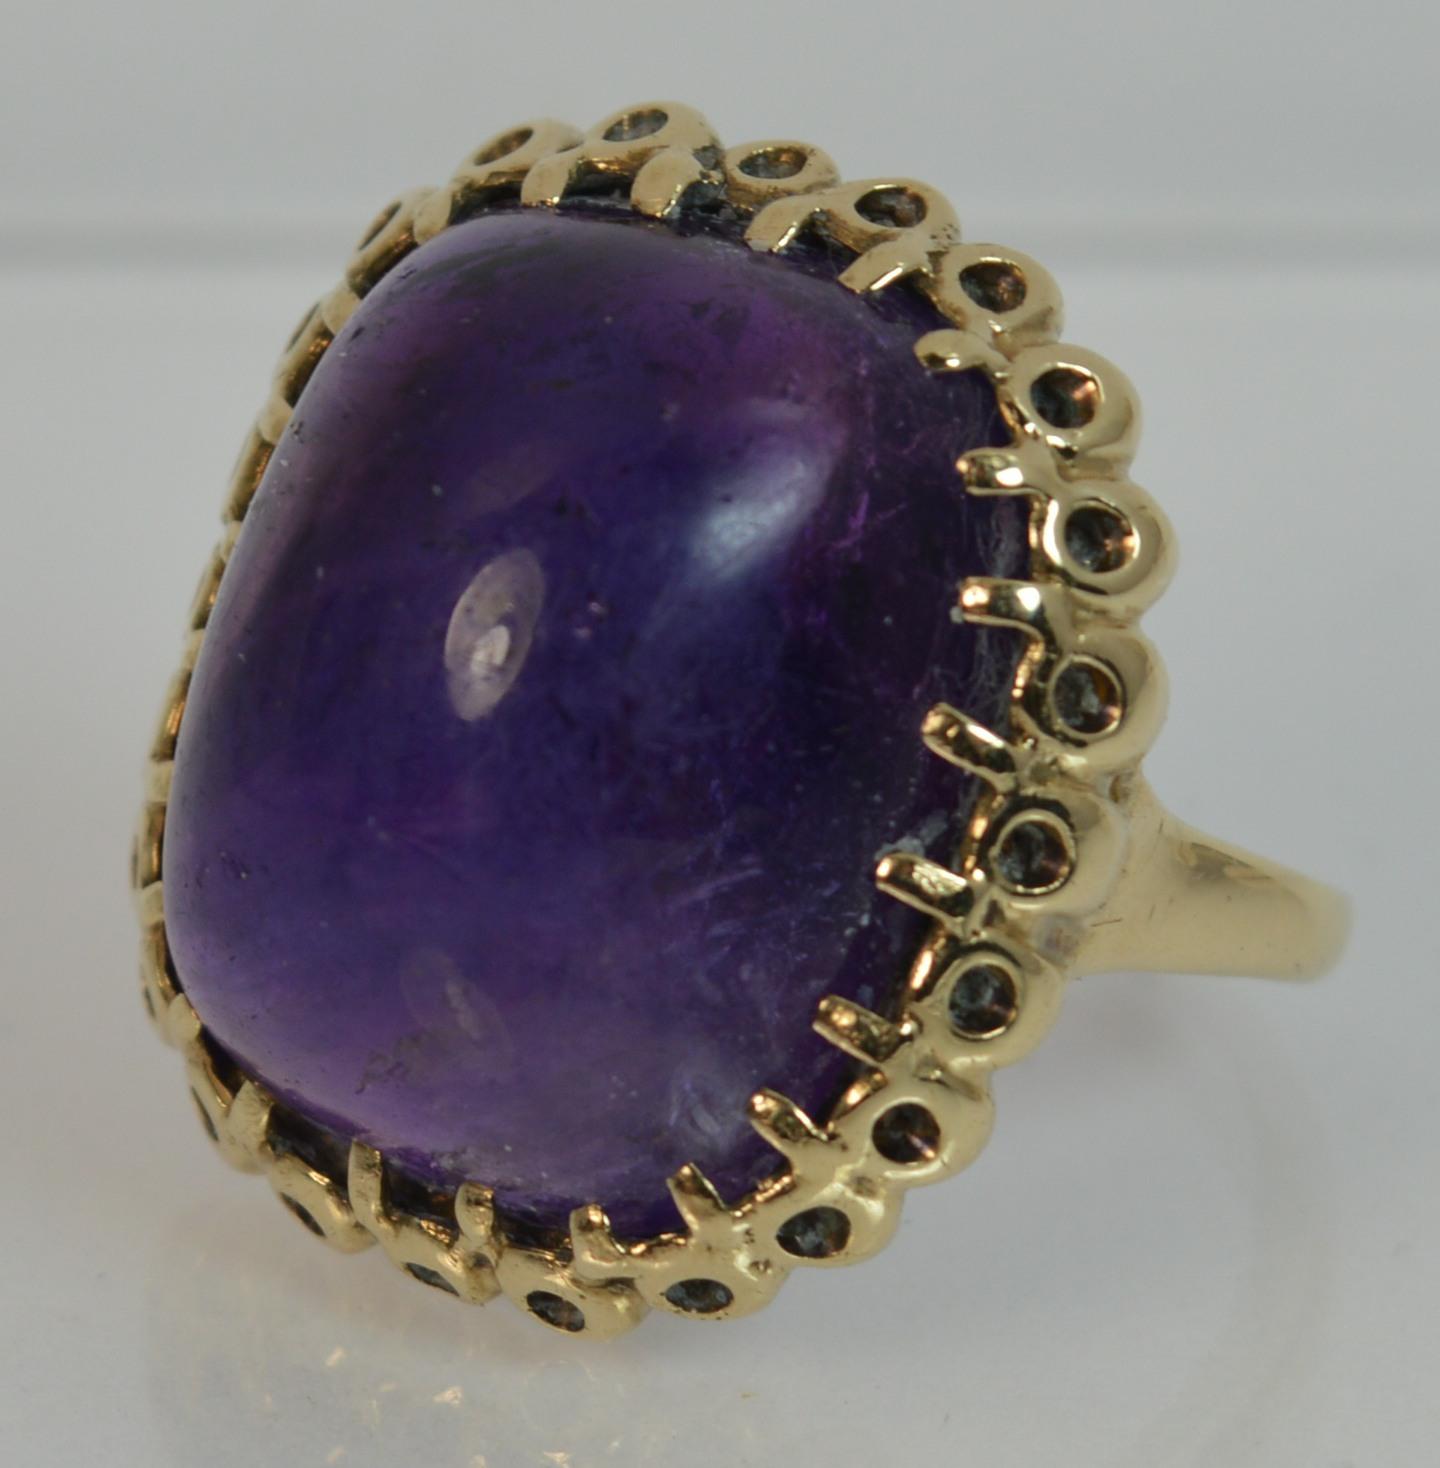 Huge Amethyst Cabochon Solitaire and Yellow Gold Ring 8